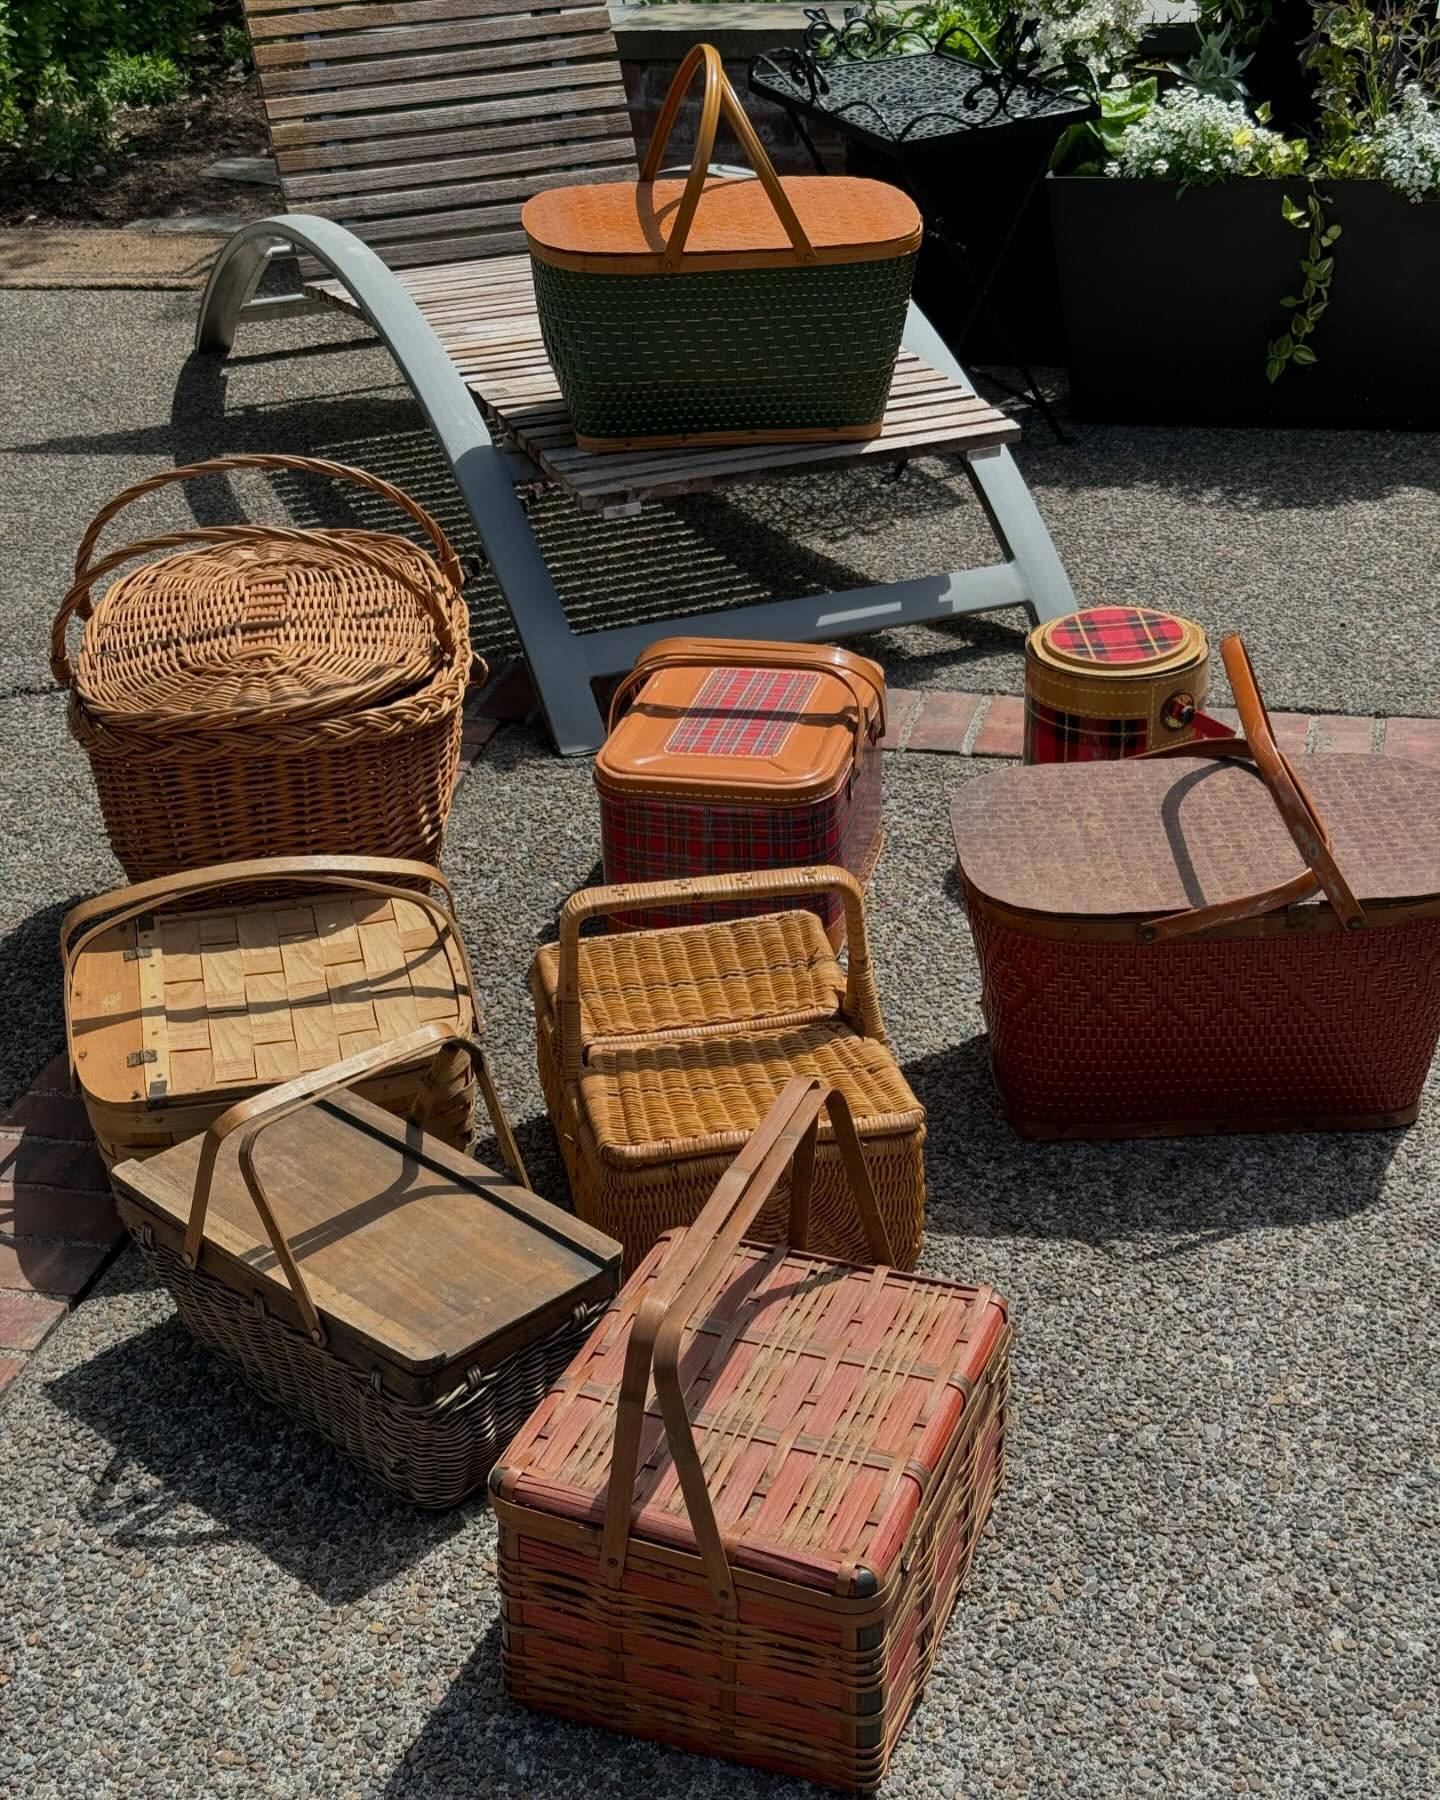 Okay&hellip;so I might have a picnic basket problem&hellip;but&hellip;I use them all! Really! Cleaning them up today while the sun is shining. They will all be used for an exciting 90th birthday celebration for my Mom! 🧺